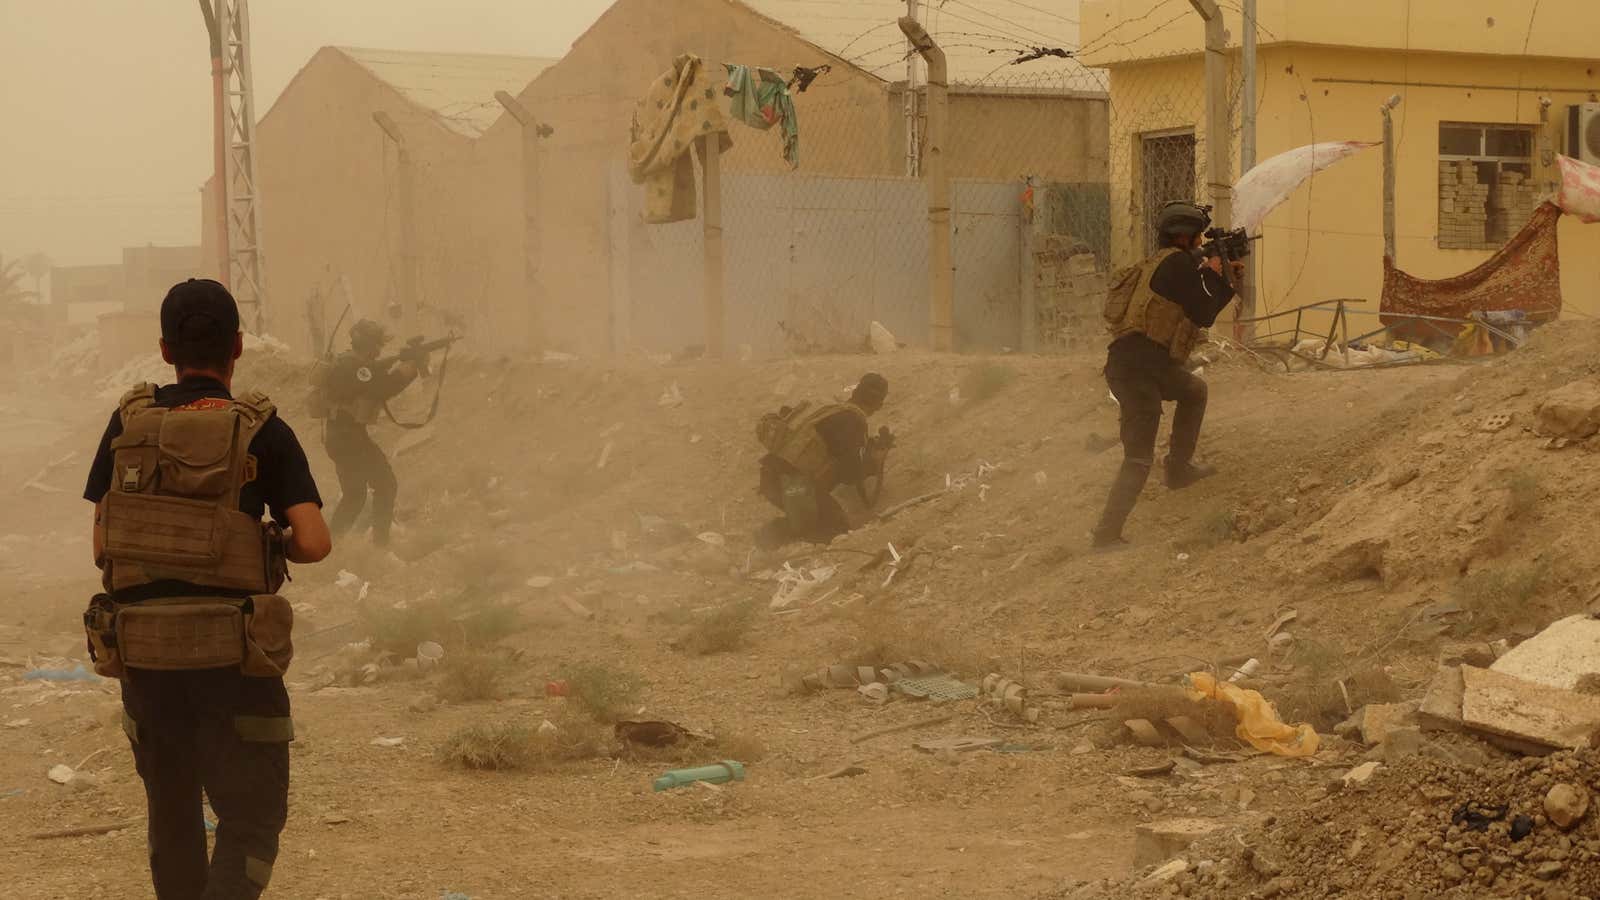 Iraqi security forces defend their headquarters against attacks by Islamic State extremists in the eastern part of Ramadi in Anbar province, May 14, 2015.